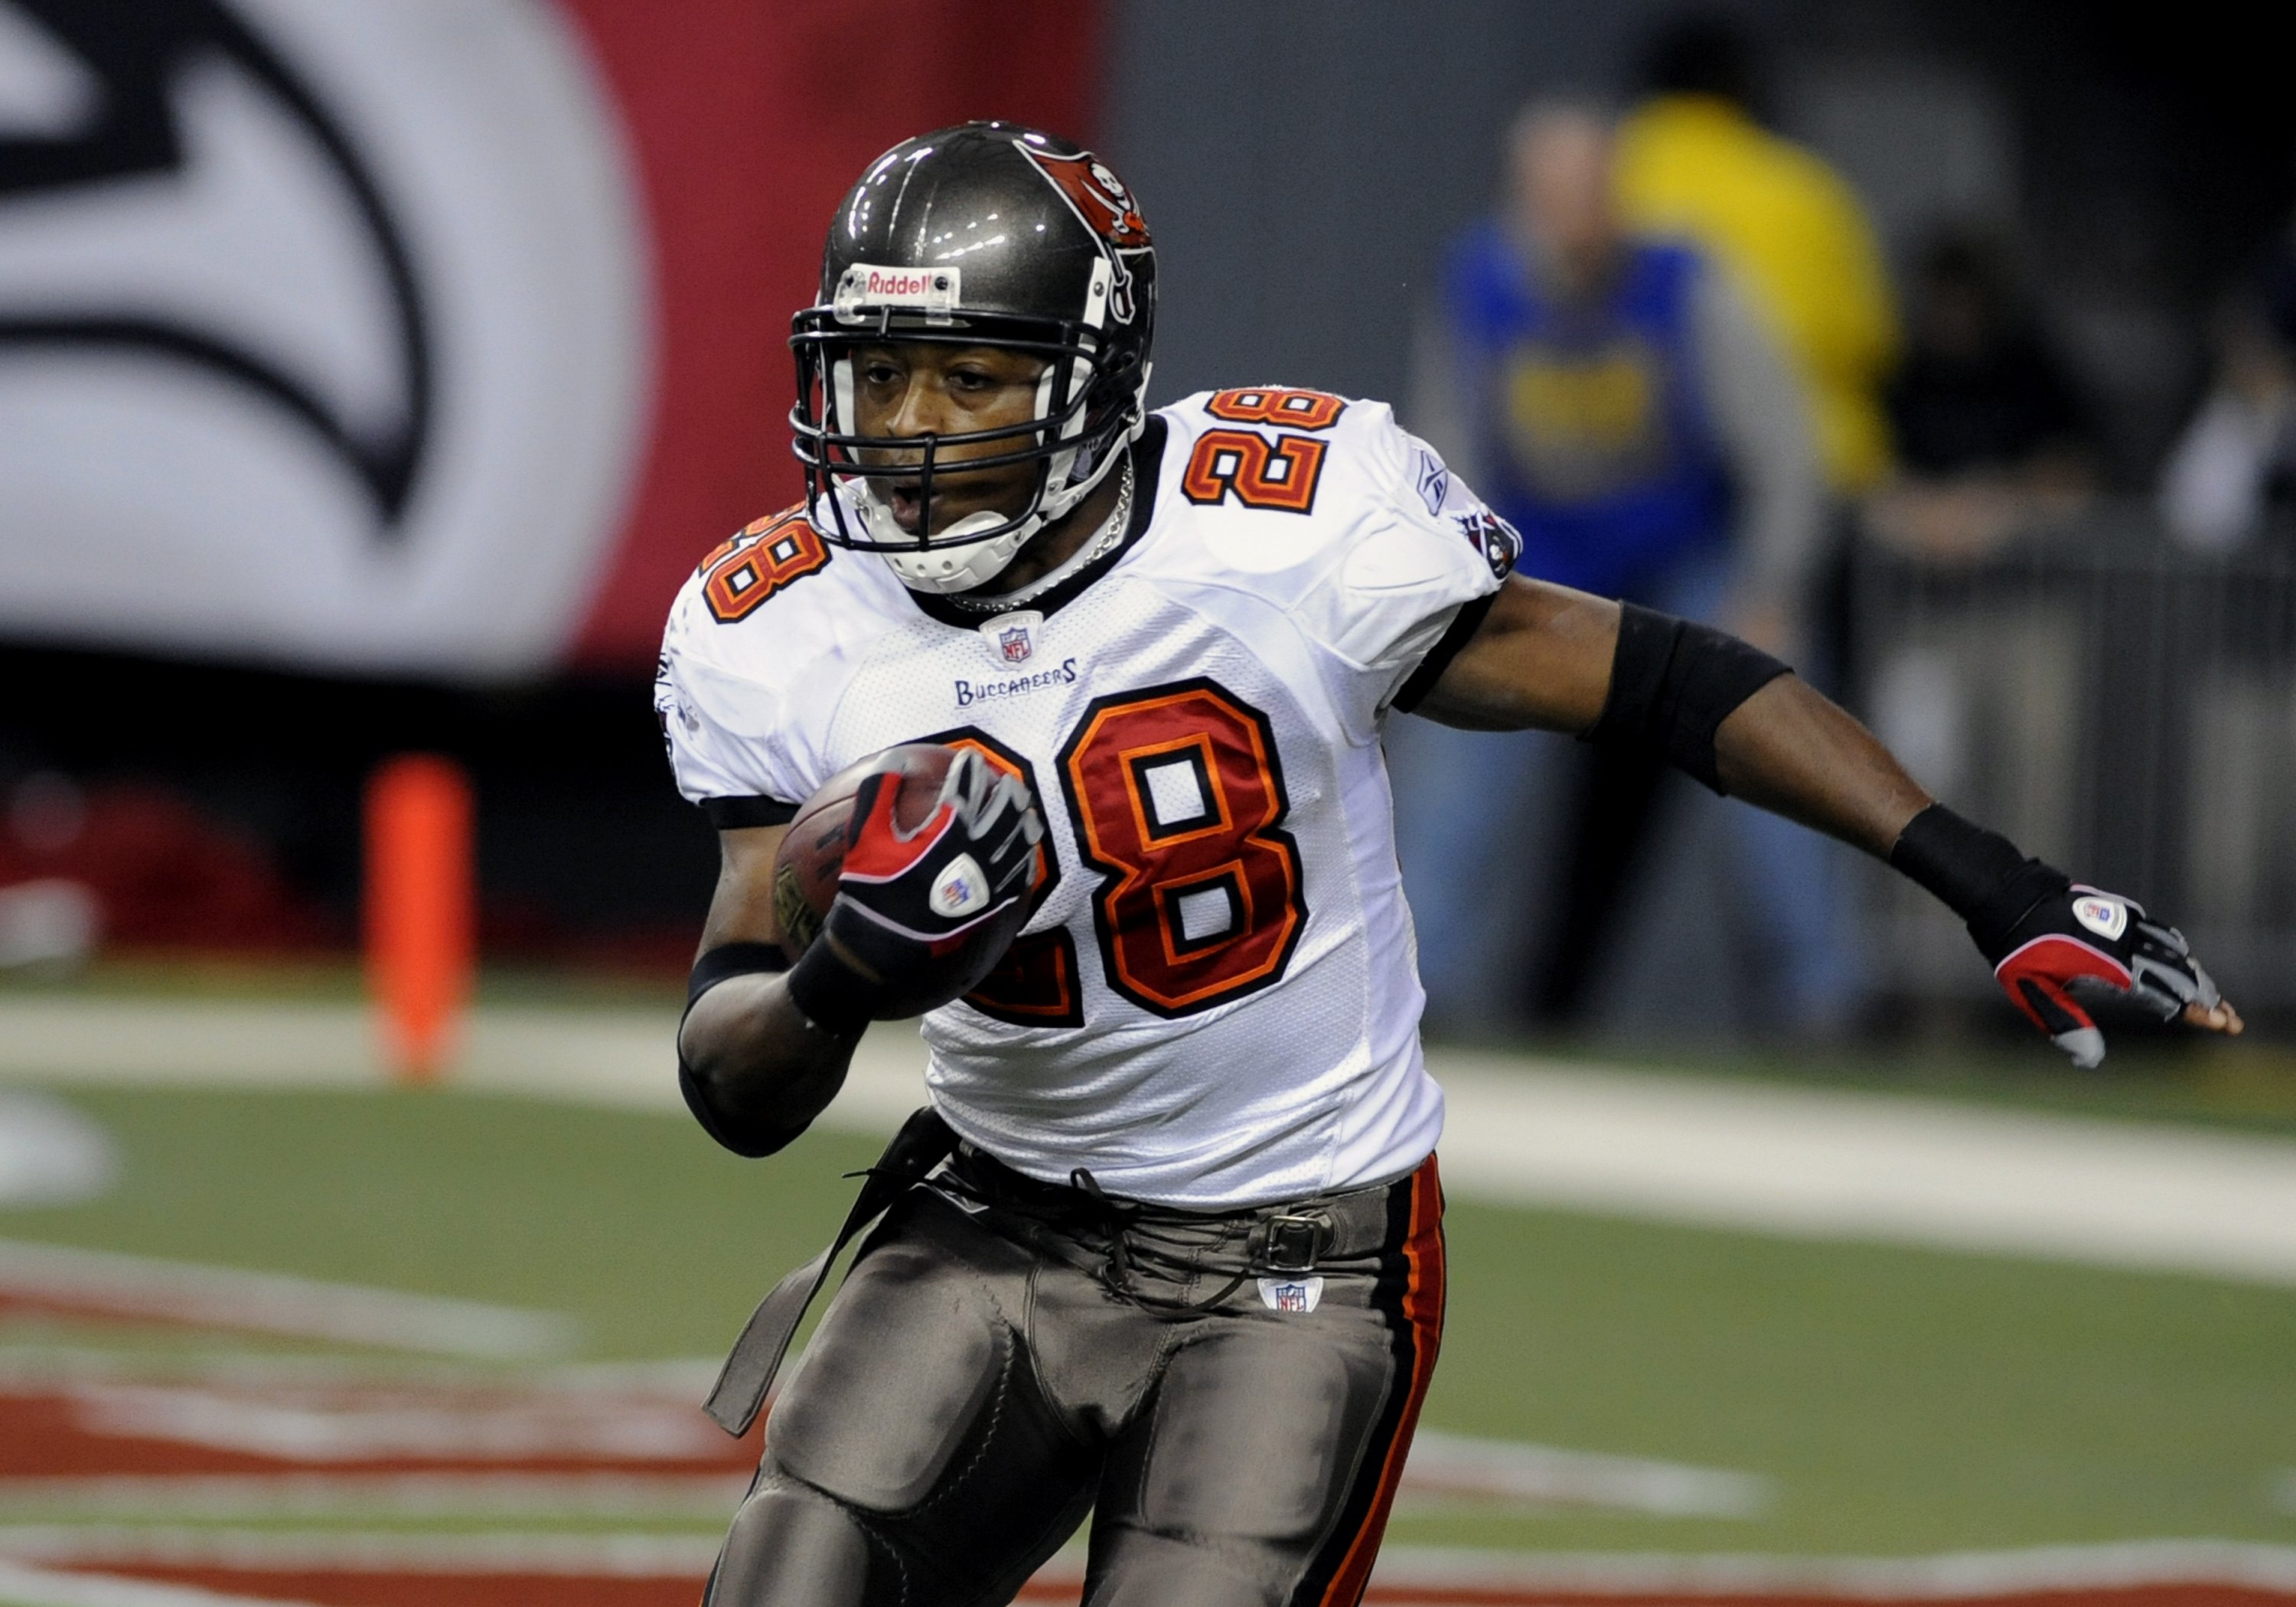 ATLANTA - DECEMBER 14: Running back Warrick Dunn #28 of the Tampa Bay Buccaneers rushes upfield against the Atlanta Falcons at the Georgia Dome on December 14, 2008 in Atlanta, Georgia.  (Photo by Al Messerschmidt/Getty Images)